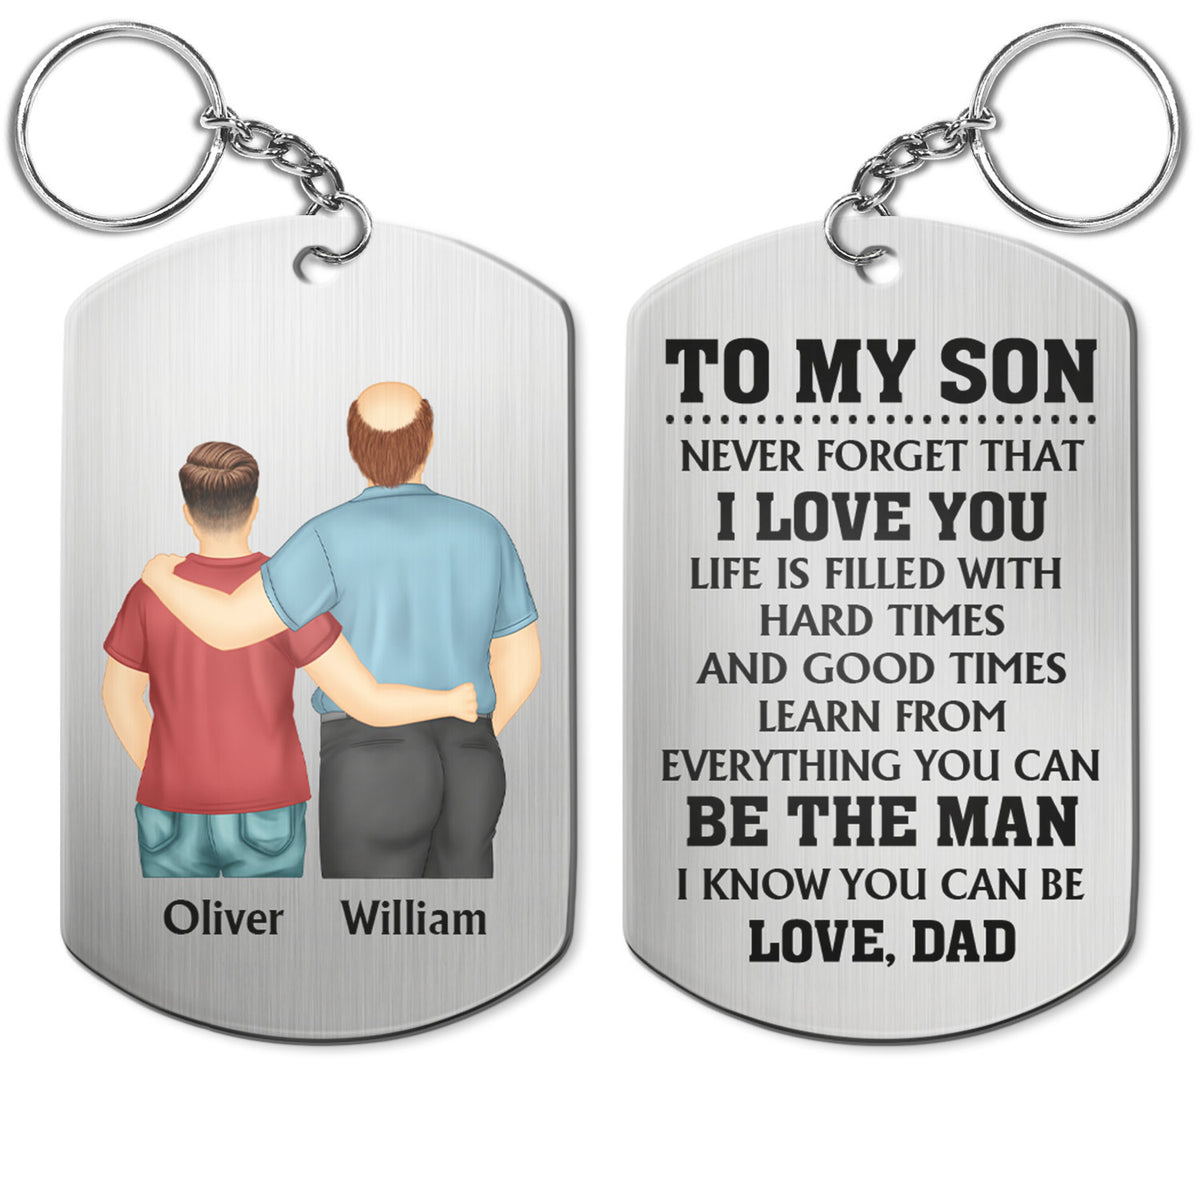 Never Forget That I Love You - Gift For Son, Daughter From Dad - Personalized Aluminum Keychain